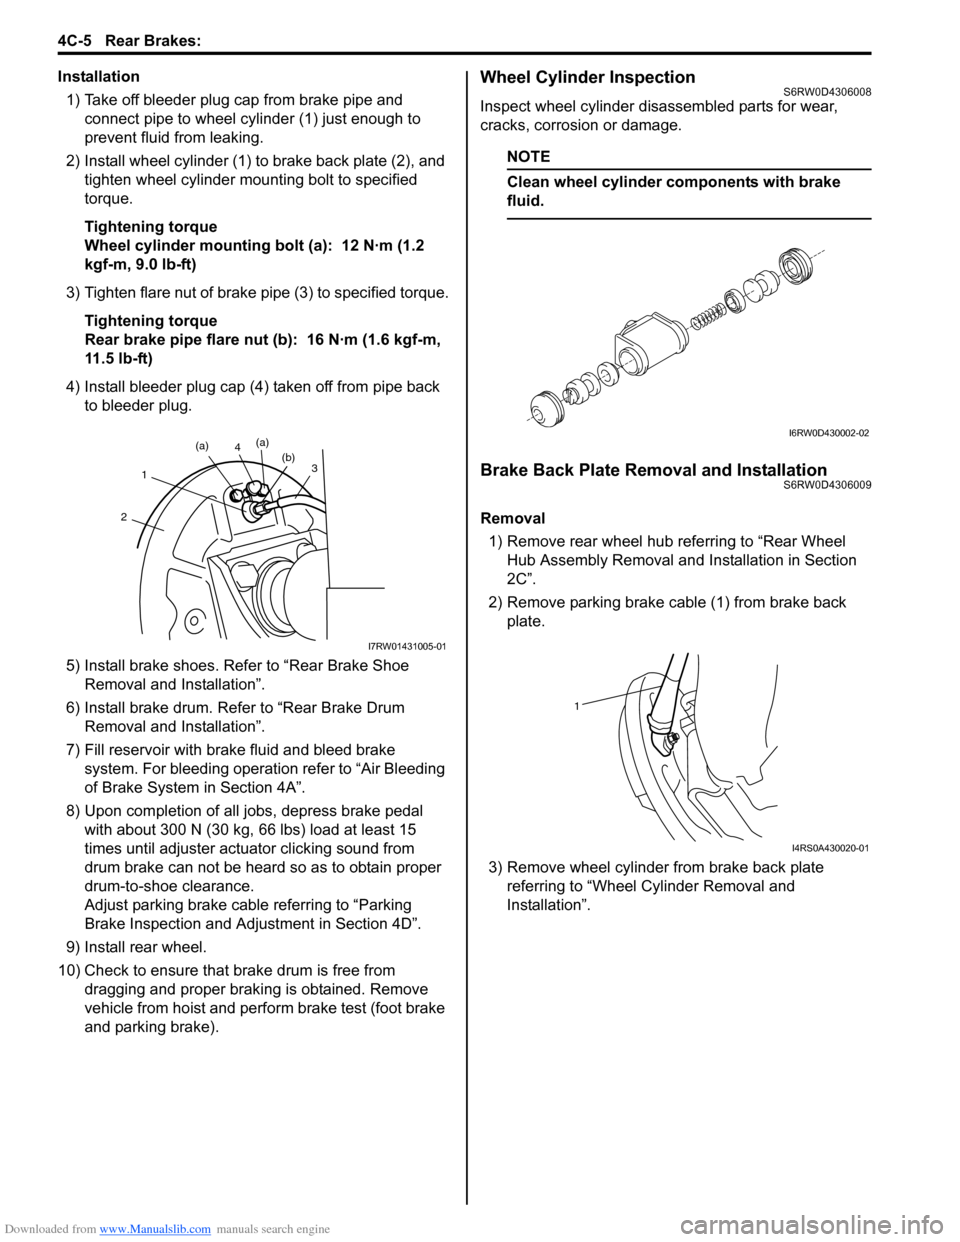 SUZUKI SX4 2006 1.G Service Owners Manual Downloaded from www.Manualslib.com manuals search engine 4C-5 Rear Brakes: 
Installation
1) Take off bleeder plug cap from brake pipe and 
connect pipe to wheel cylinder (1) just enough to 
prevent fl